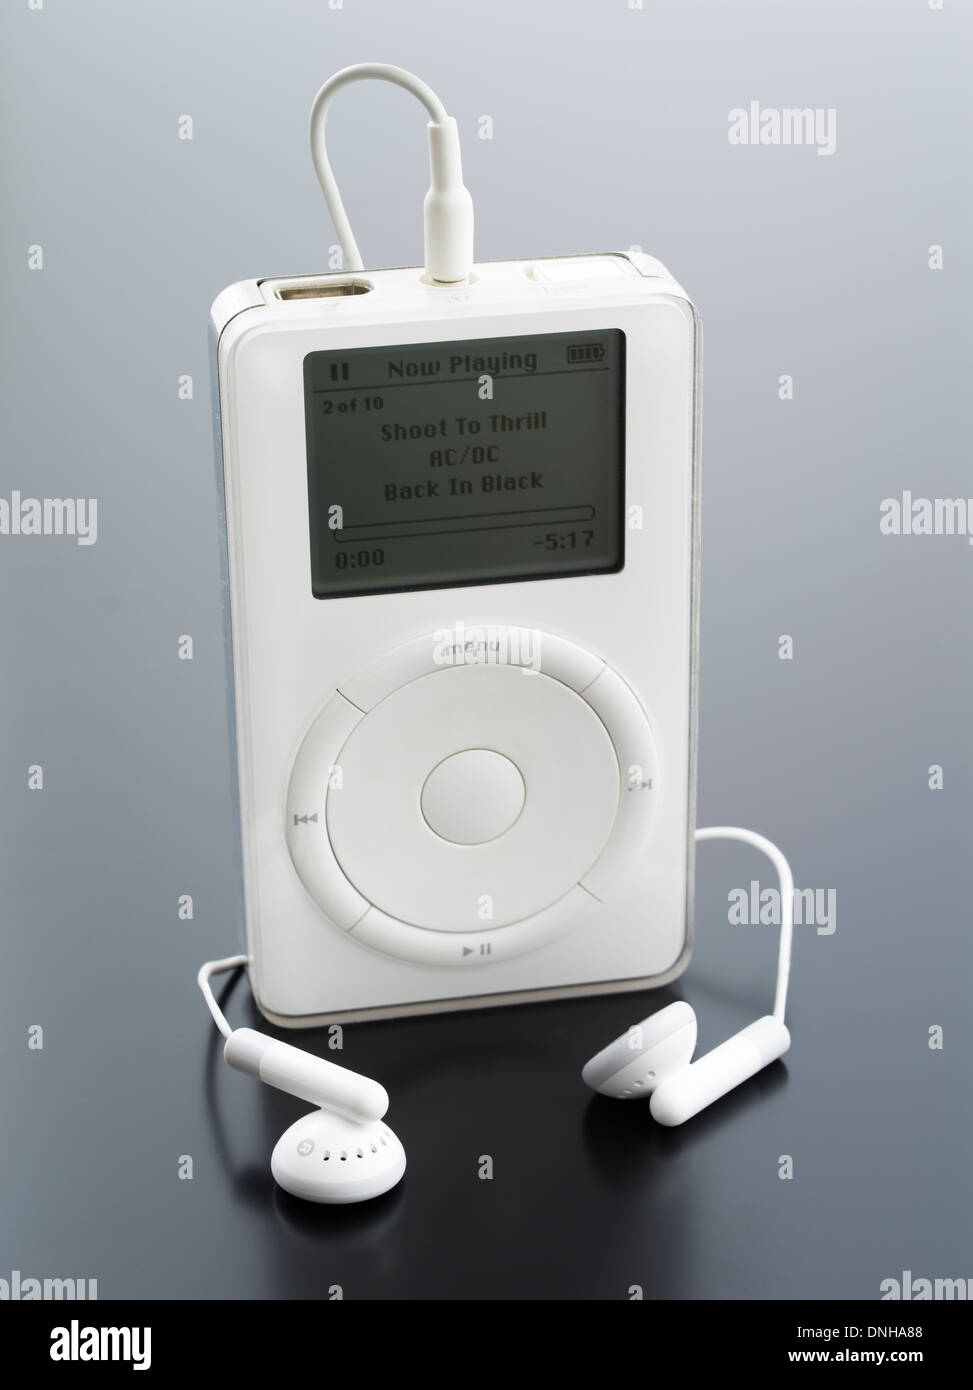 Apple iPod 1st generation released October 23, 2001 with buds earphones in  white iconic portable music device Stock Photo - Alamy